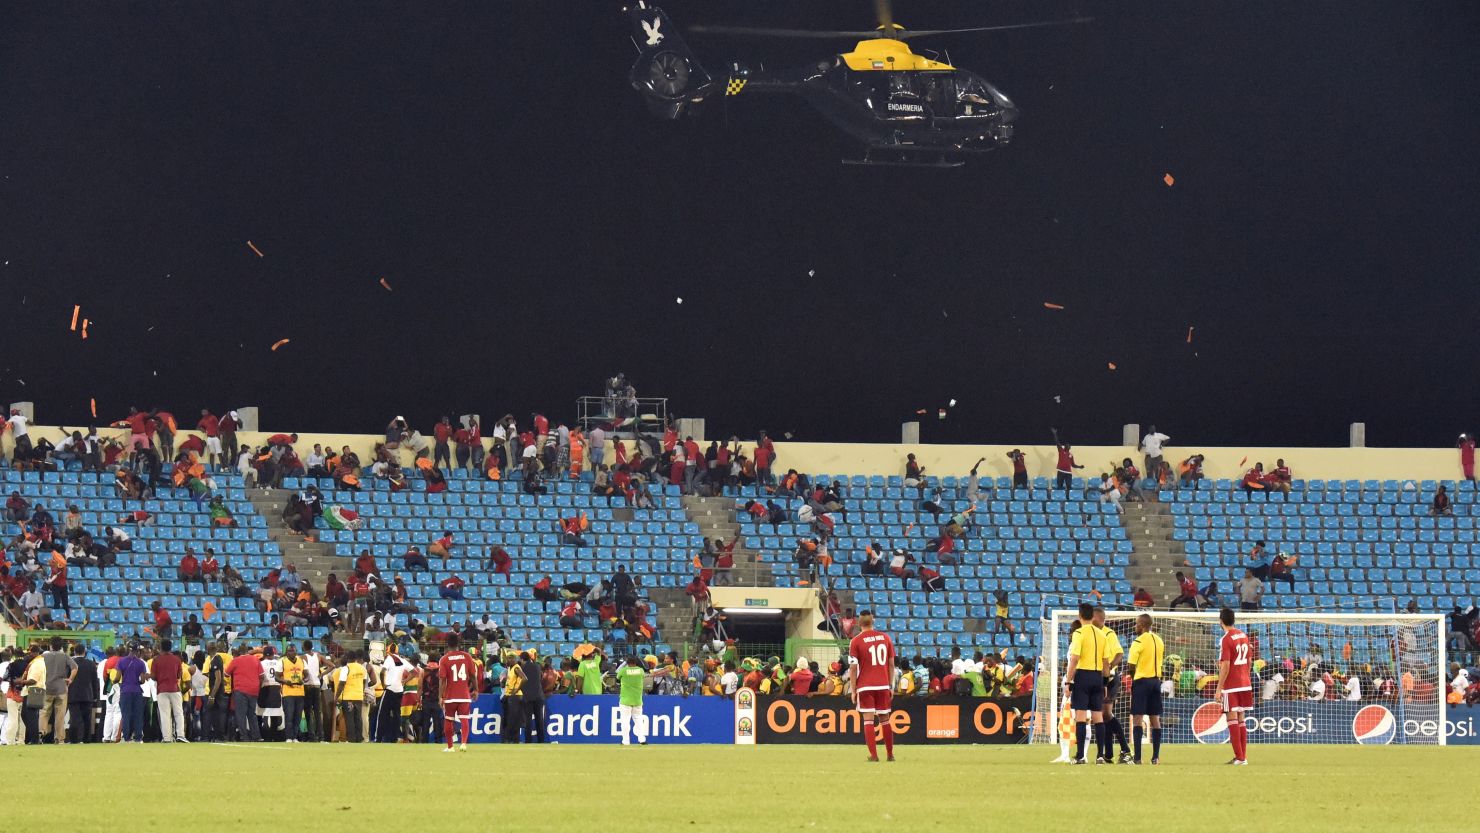 A police helicopter flies over the stadium during an interruption of the 2015 African Cup of Nations semi-final football match between Equatorial Guinea and Ghana in Malabo, on February 5, 2015. Play was halted eight minutes from time in the Africa Cup of Nations semi-final between hosts Equatorial Guinea and Ghana when missiles were thrown on the pitch.